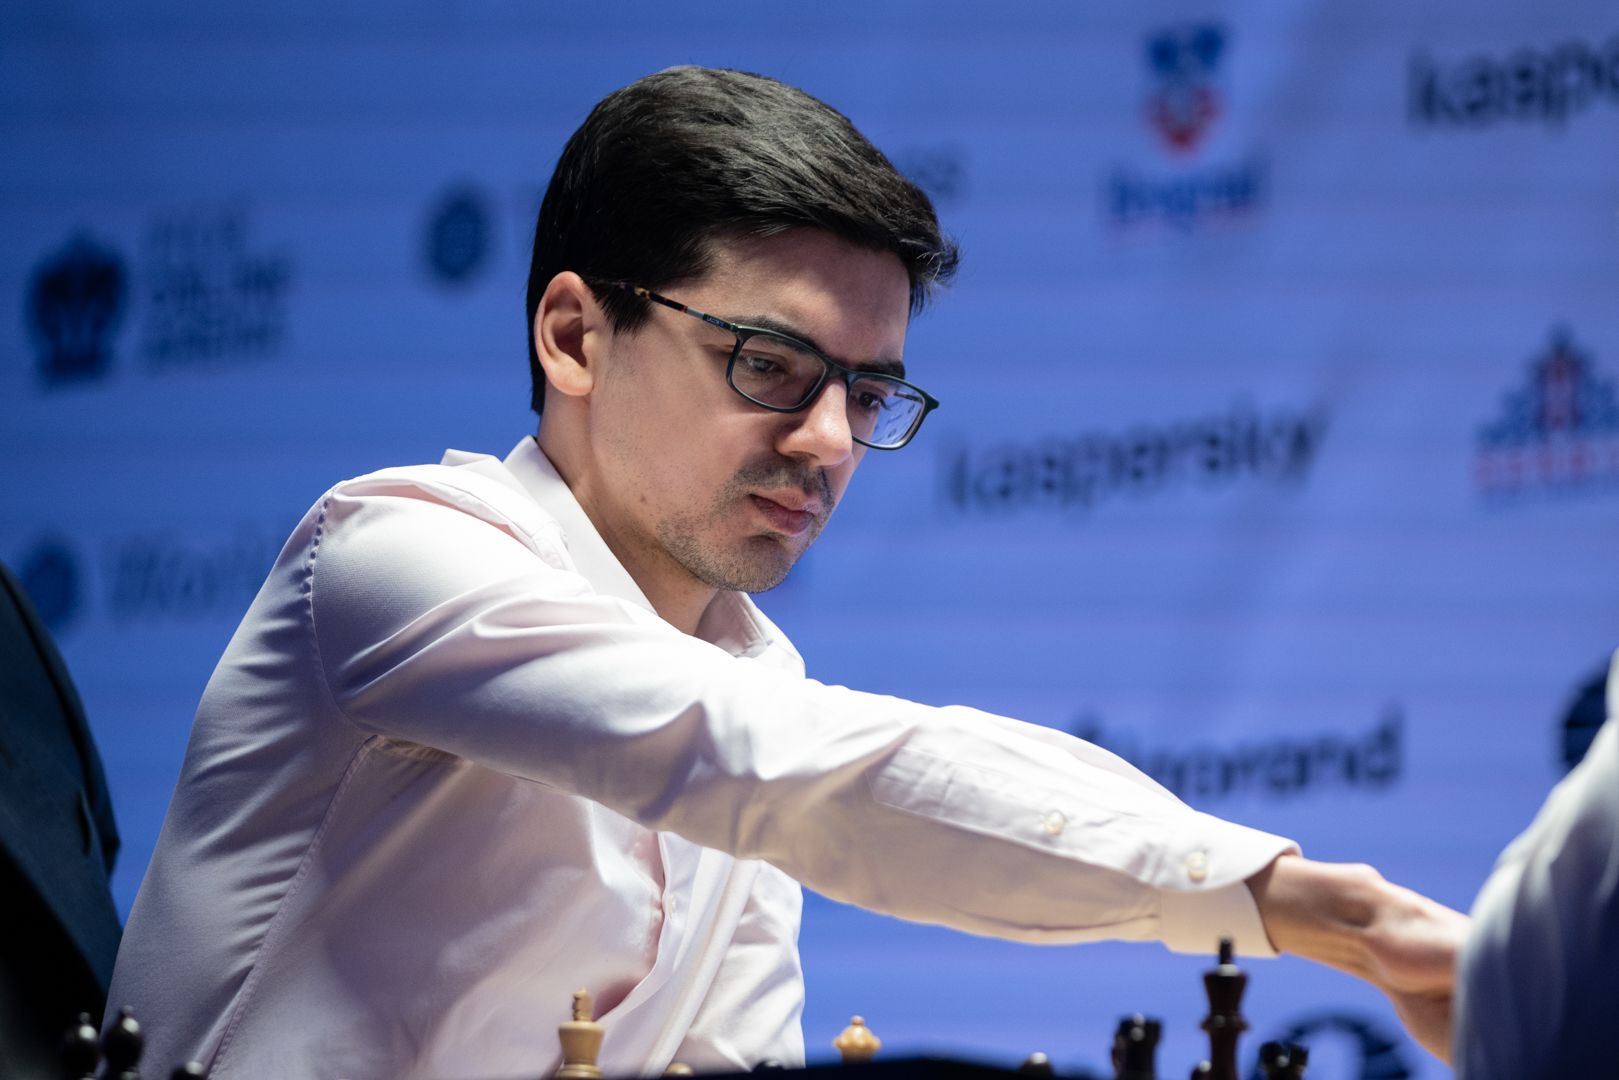 Anish Giri clinches his 5th title for Dutch Championship after defeating  Jorden van Foreest 3.5-2.5 in Final Blitz tiebreak. : r/chess